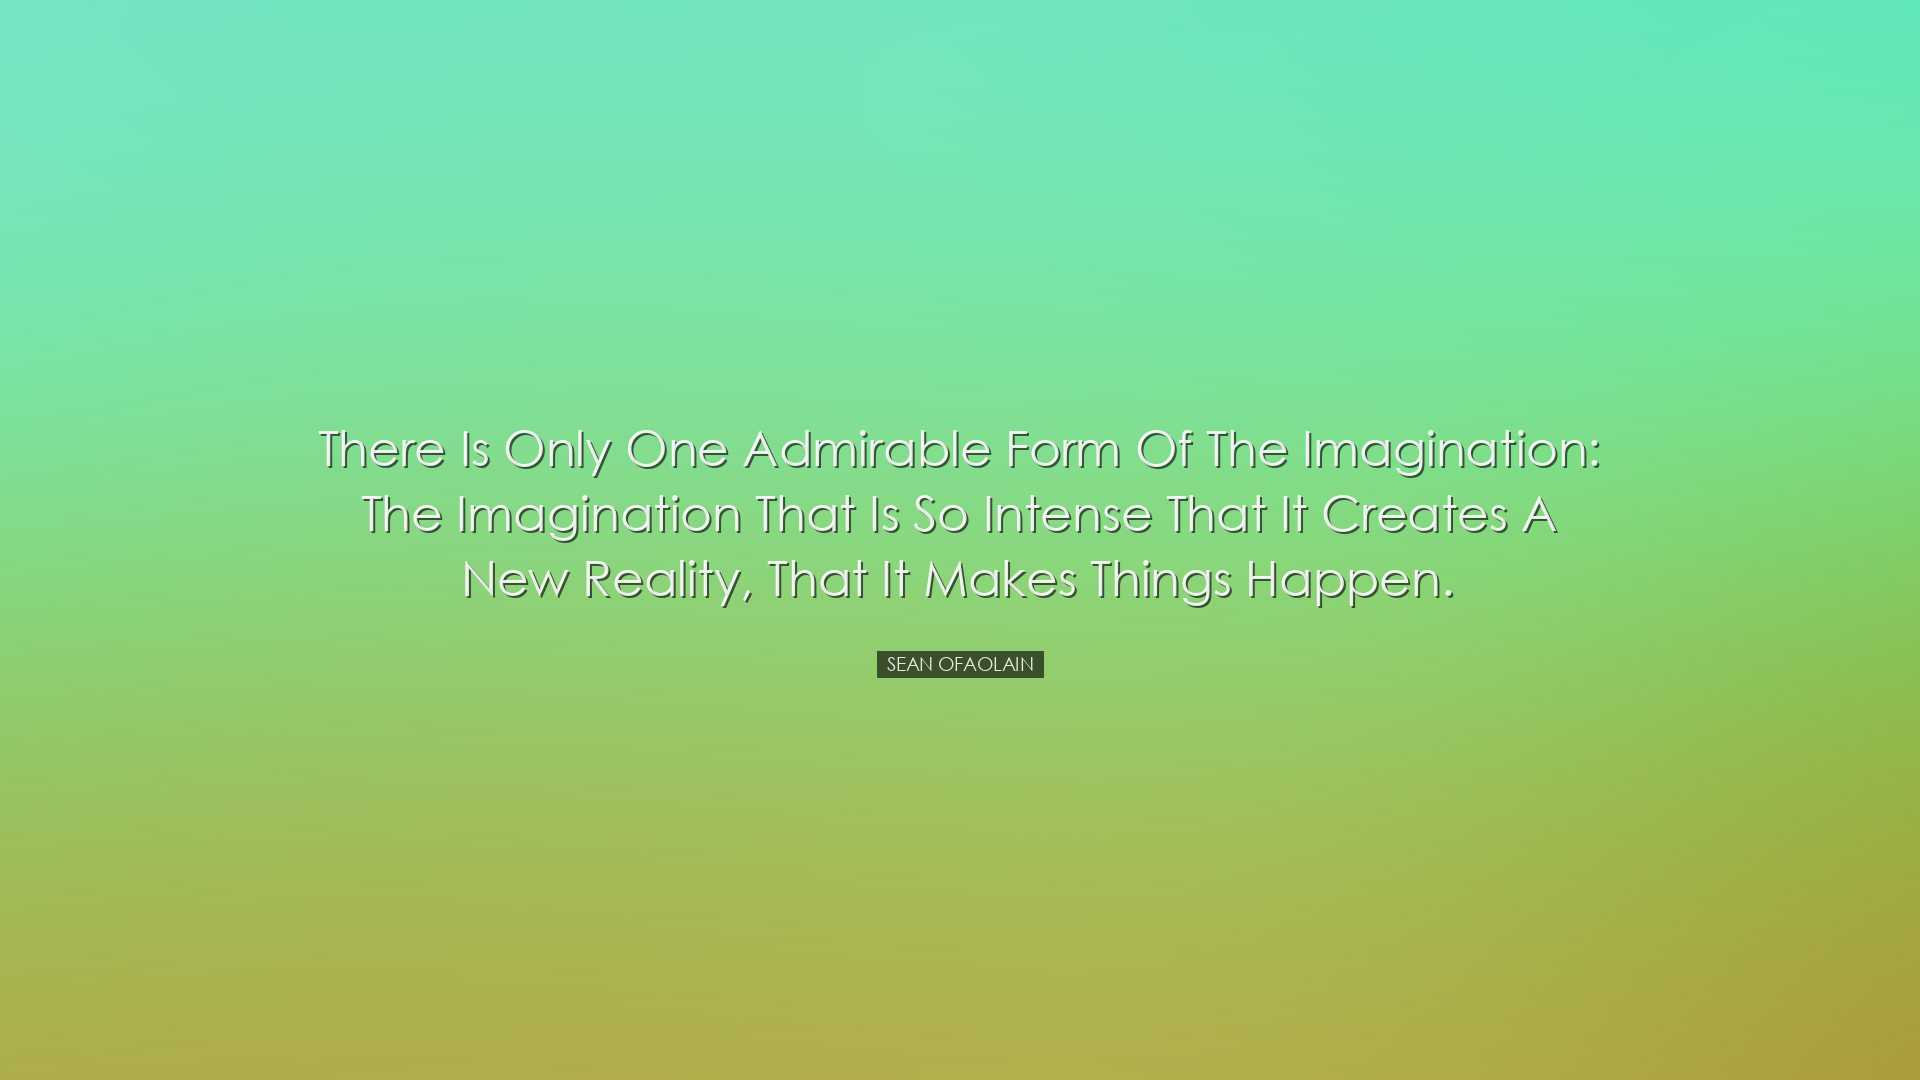 There is only one admirable form of the imagination: the imaginati